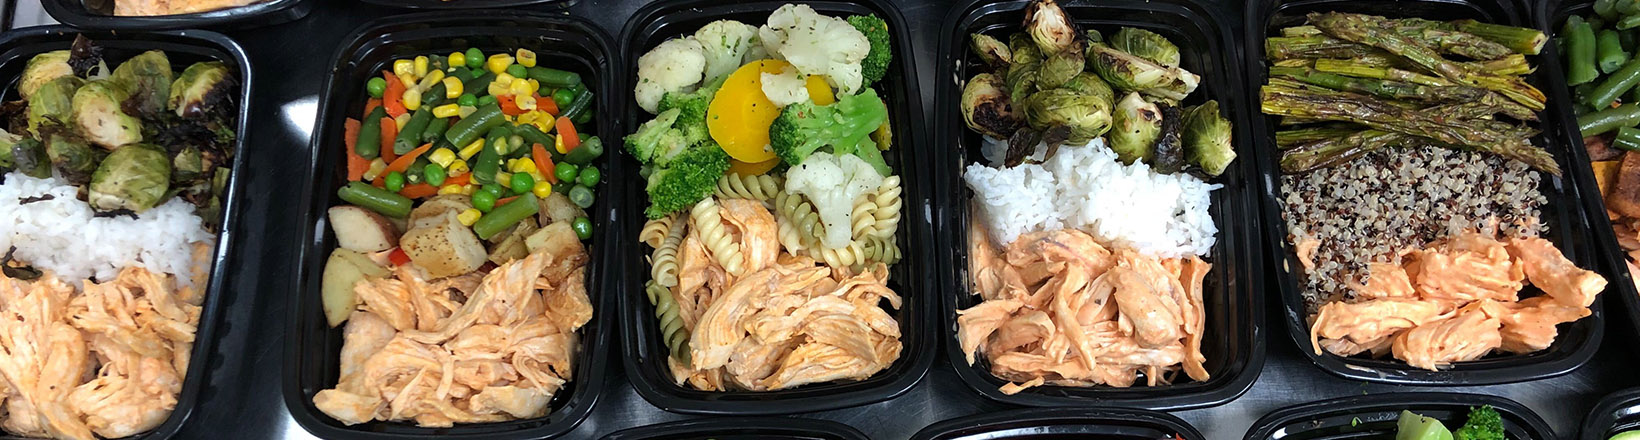 healthy meal prep food trays